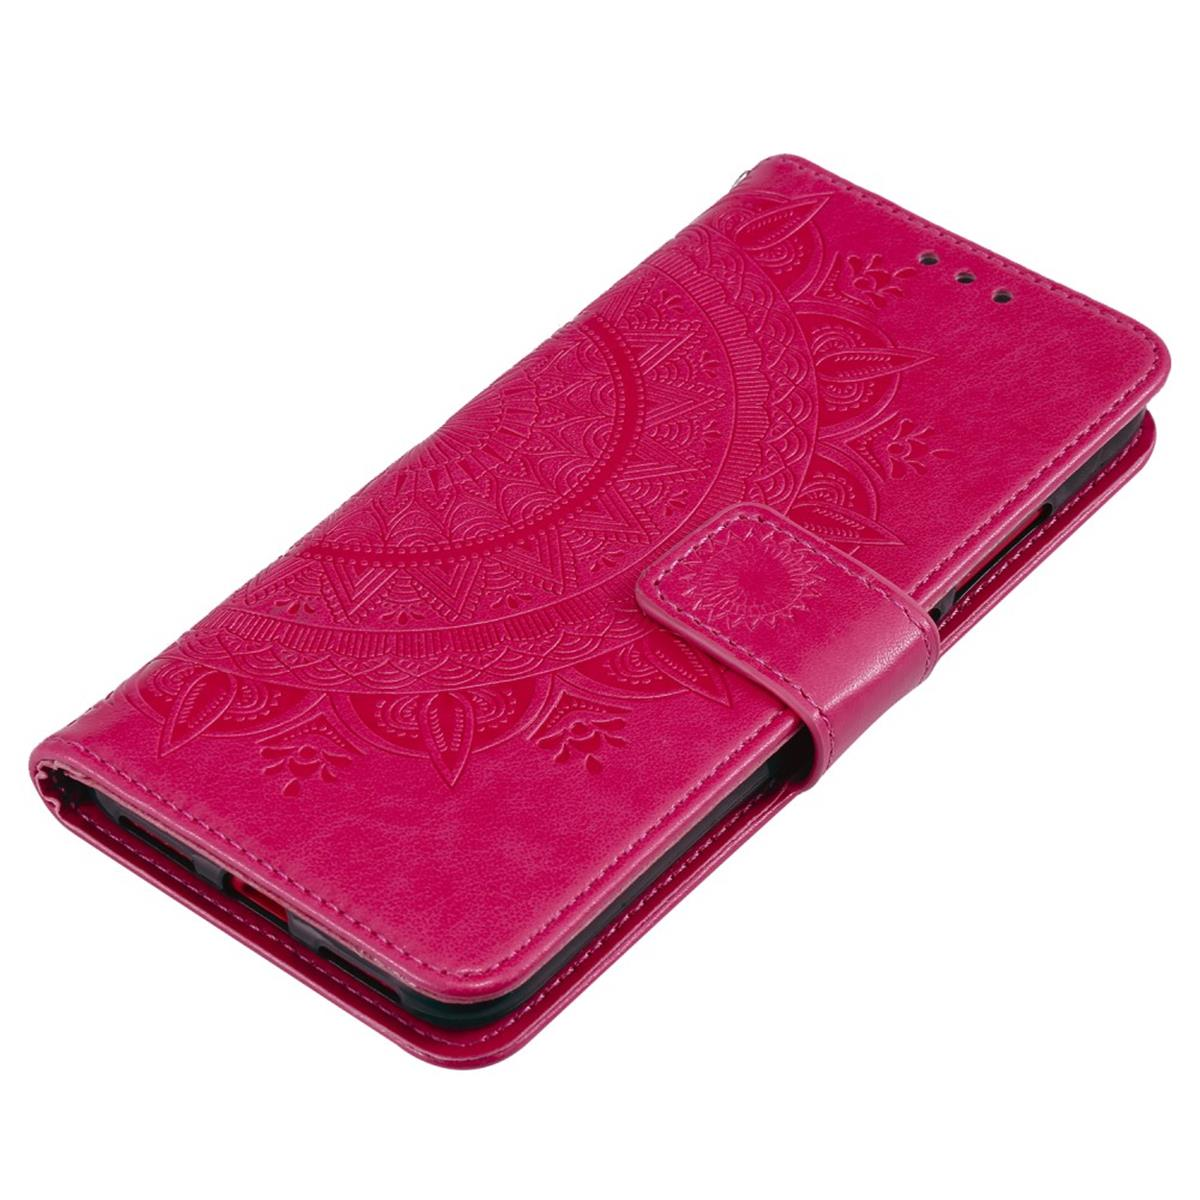 COVERKINGZ Klapphülle mit Mandala Muster, 1.4, Bookcover, Pink Nokia